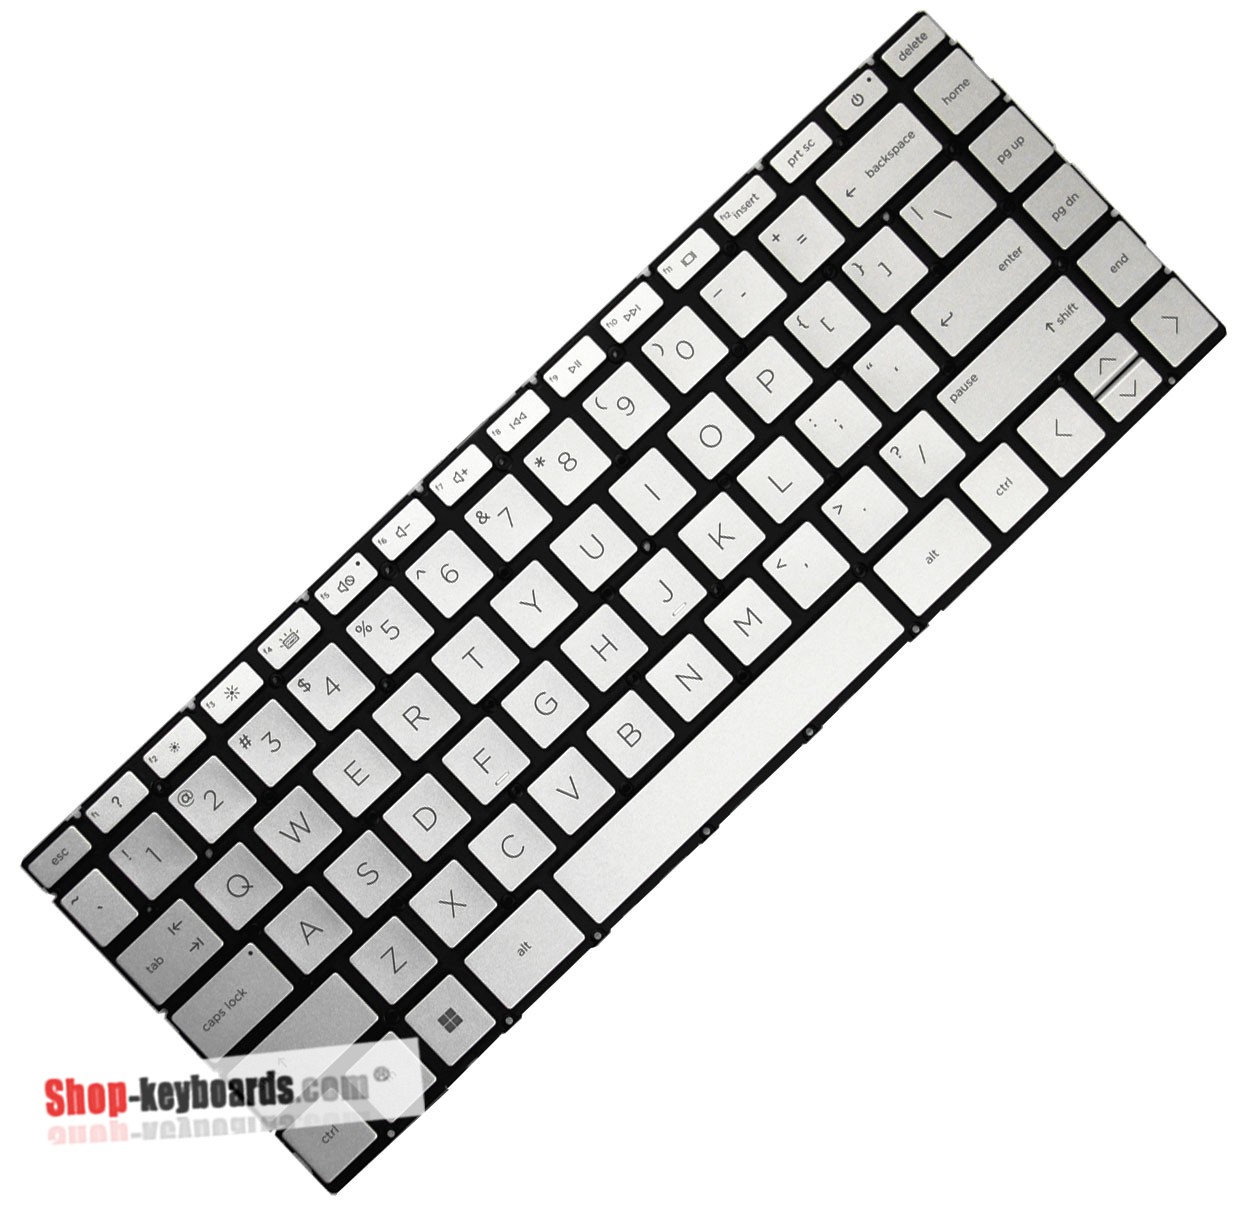 HP SG-A8630-X1A Keyboard replacement